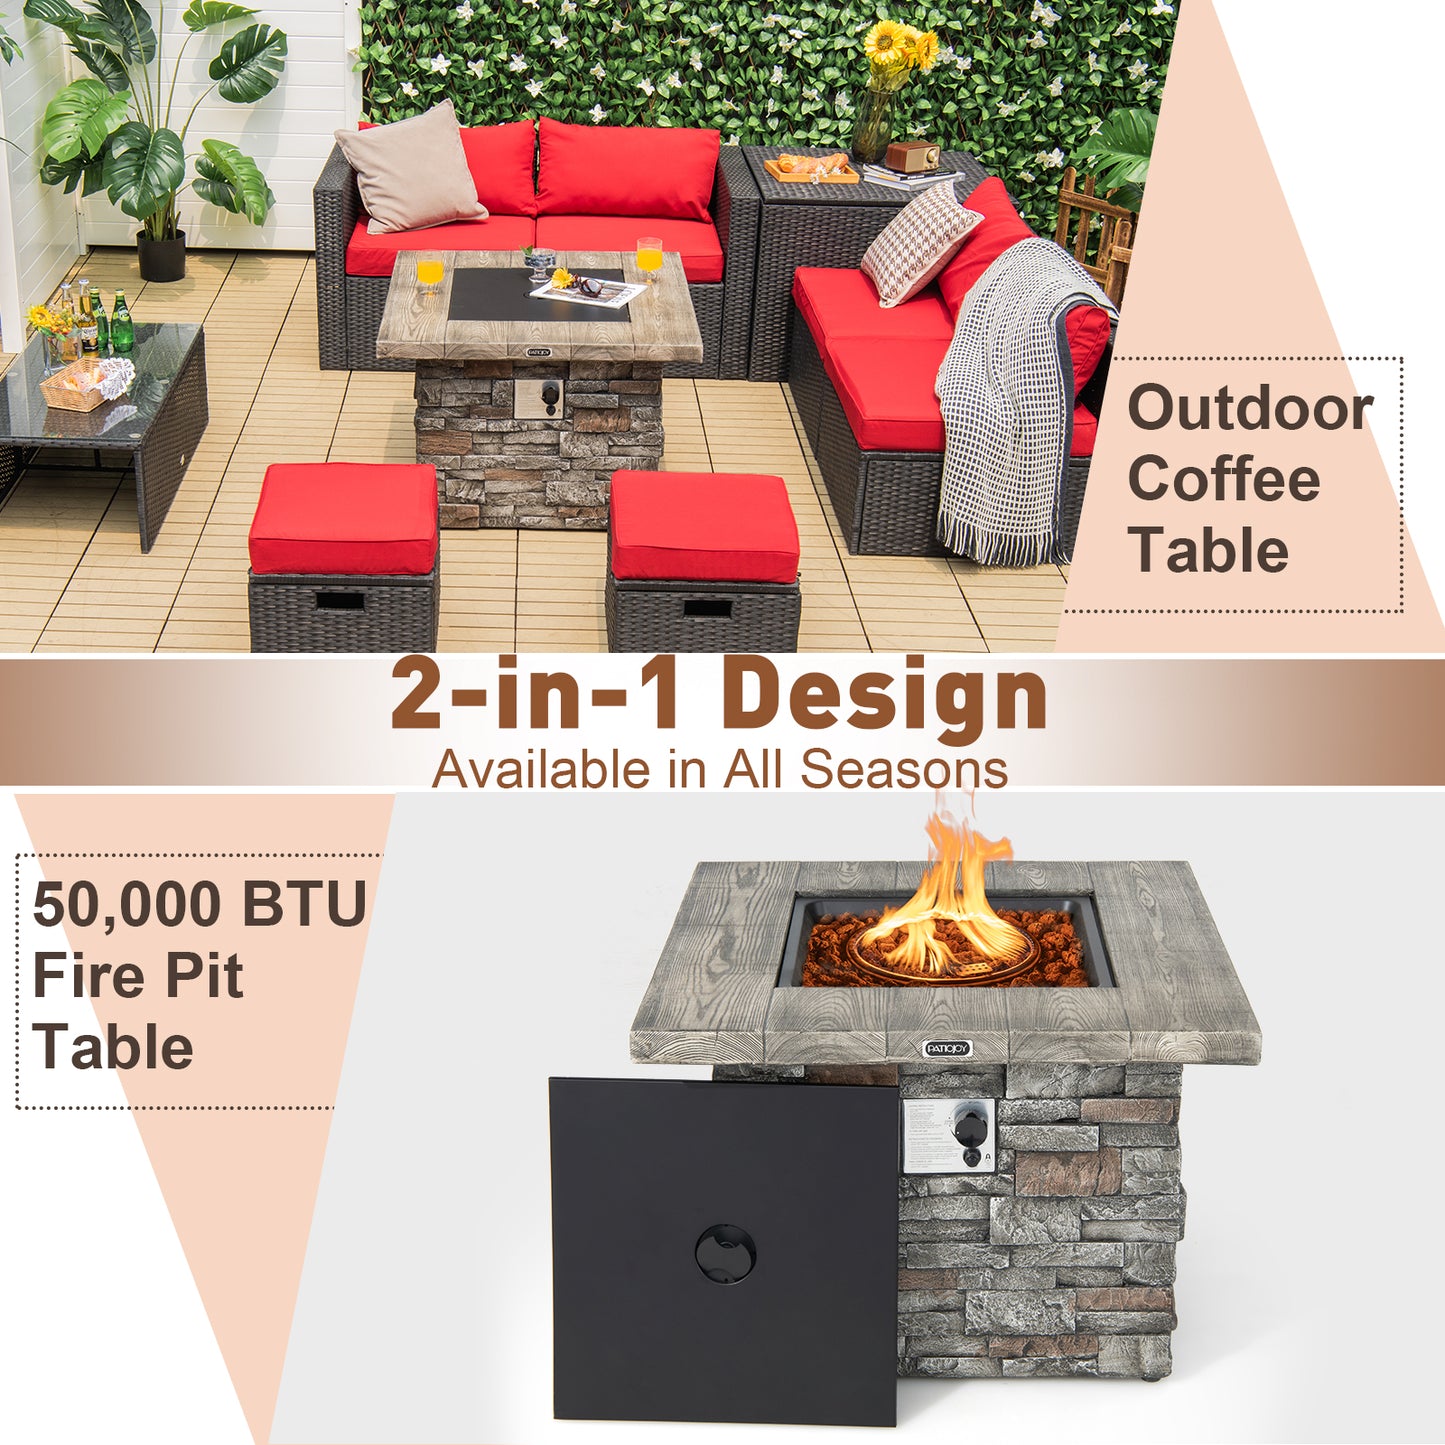 34.5 Inch Square Propane Gas Fire Pit Table with Lava Rock and PVC Cover-Gray